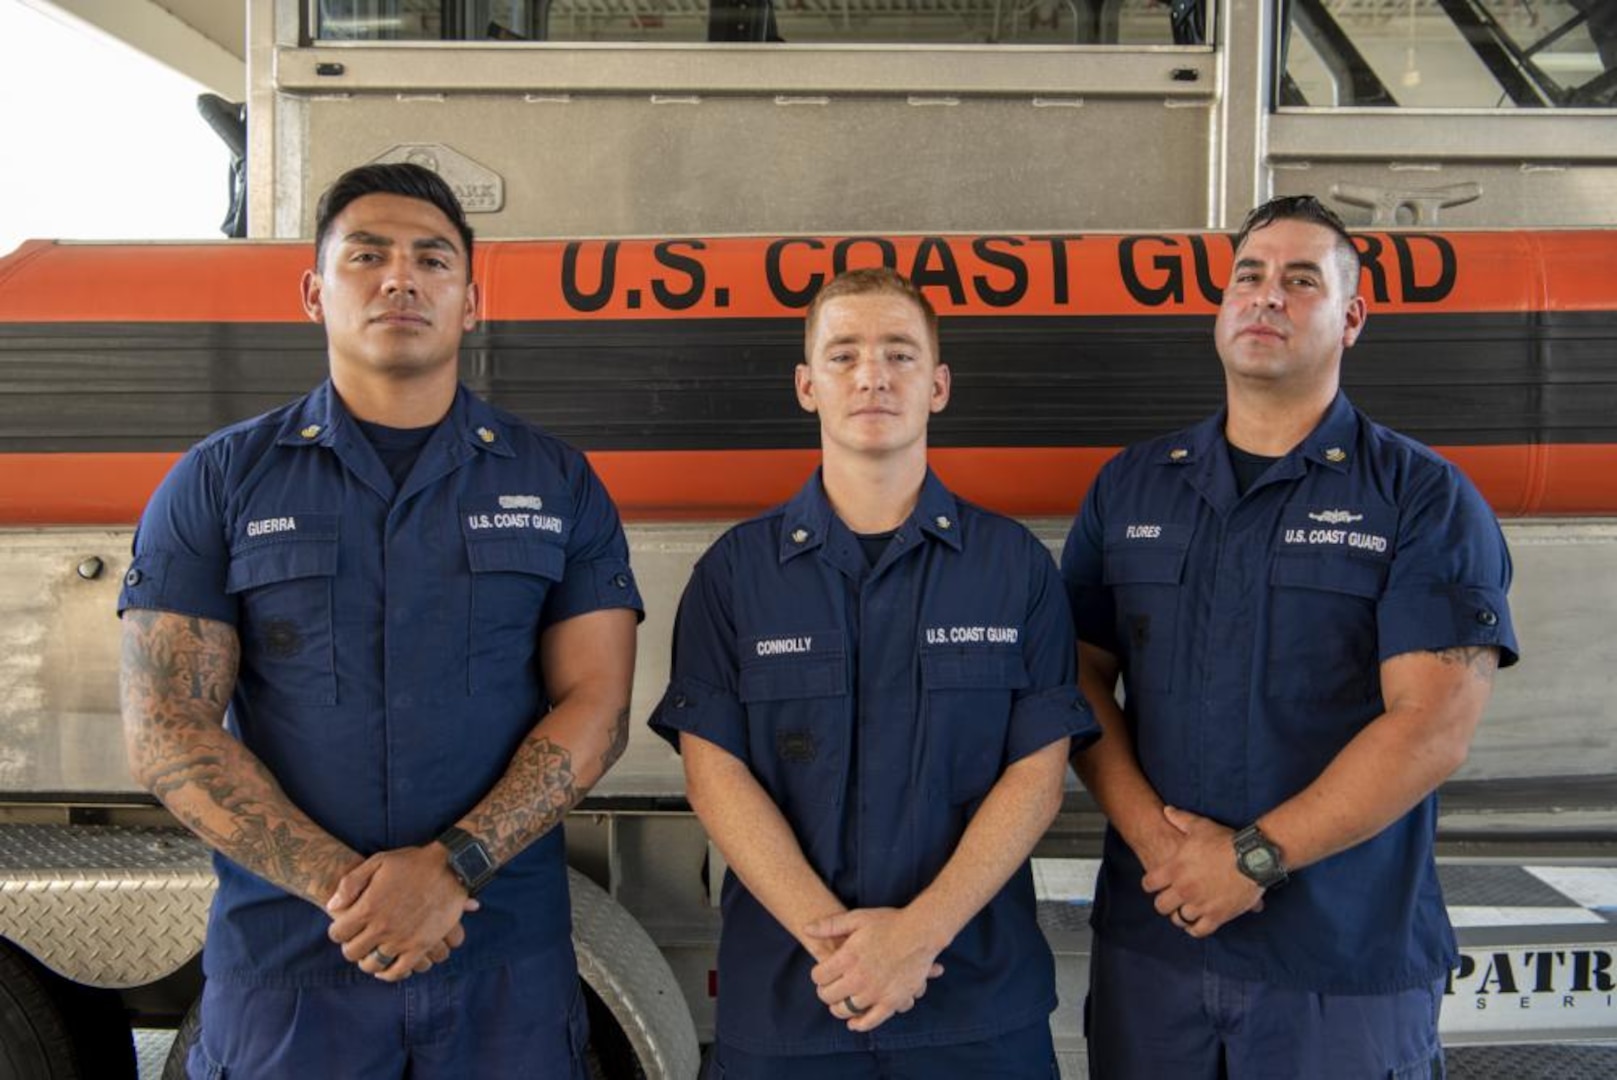 Petty Officer 2nd Class Jarrett Guerra, Petty Officer 3rd Class Corey Connolly and Petty Officer 2nd Class Jake Flores, members of Coast Guard Maritime Safety & Security Team Houston, pose for a photo in the unit’s boat shed in Houston, Texas, July 14, 2022. While deployed to the Rio Grande on June 2, 2022, Guerra, Connolly and Flores saved two adult females and a 1-year-old boy from drowning in the river. (U.S. Coast Guard photo by Petty Officer 1st Class Corinne Zilnicki)